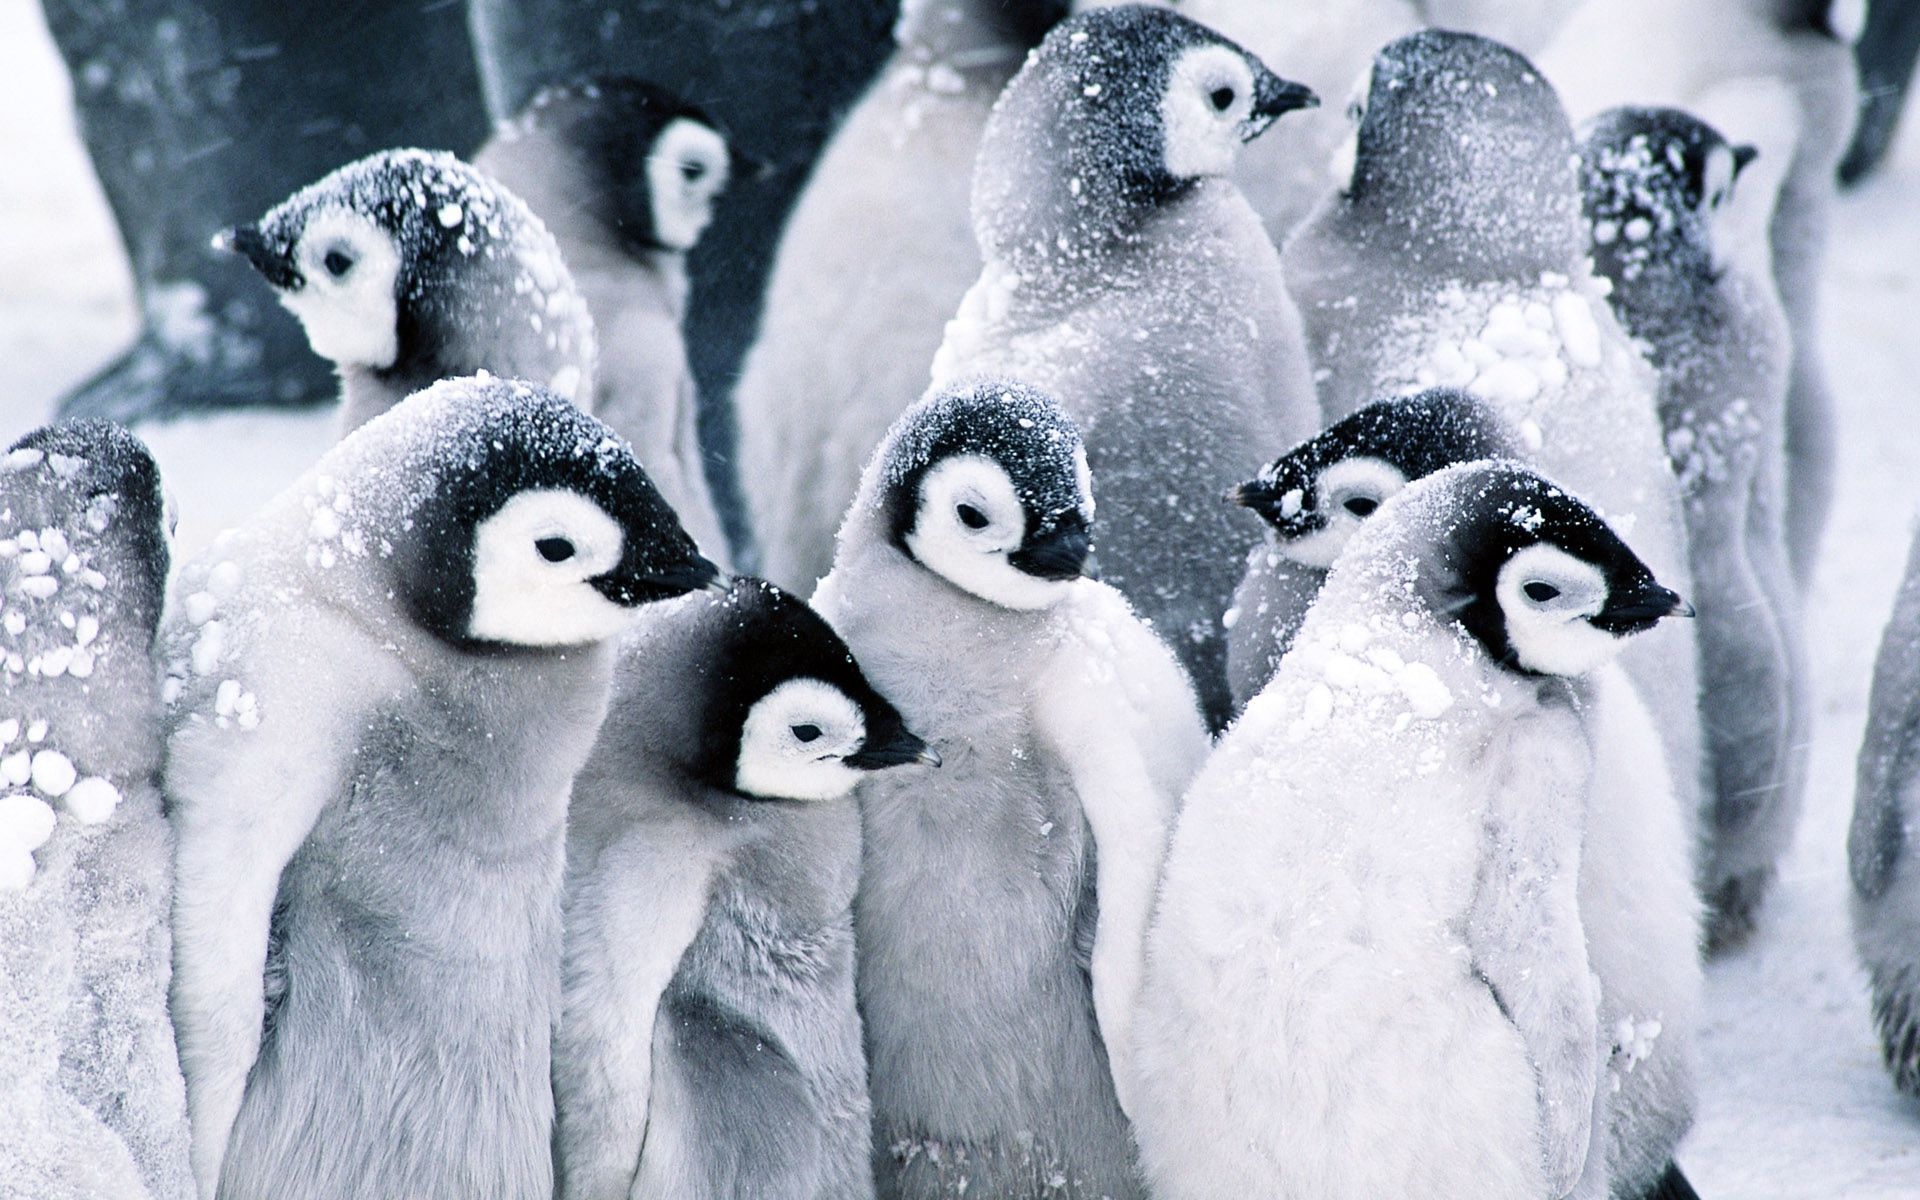 Colony of penguins in the snow wallpaper 15944